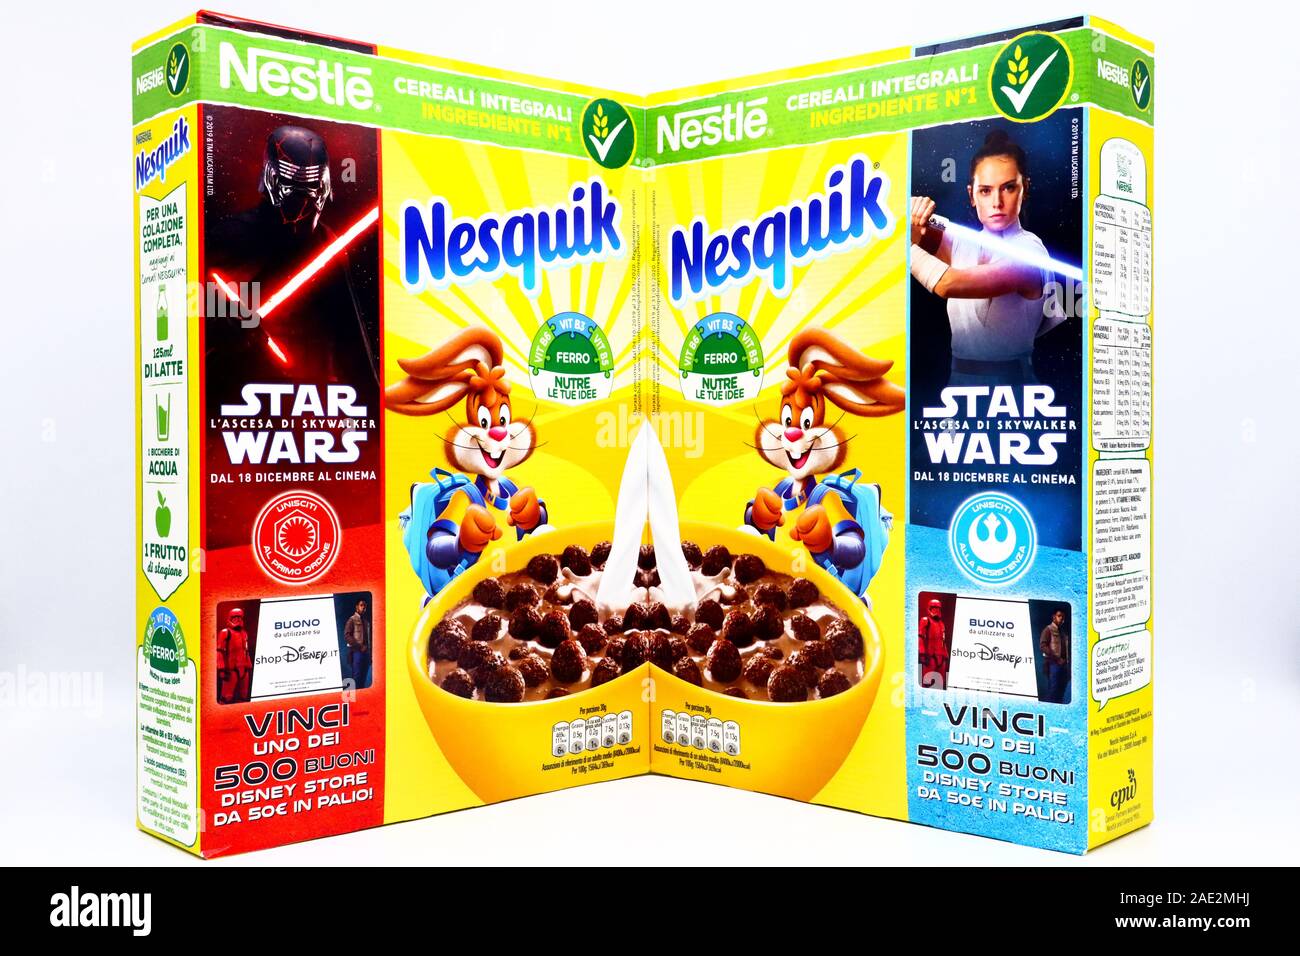 NESQUIK Nestlé promotional Cereals box for the movie STAR WARS The Rise of Skywalker Stock Photo